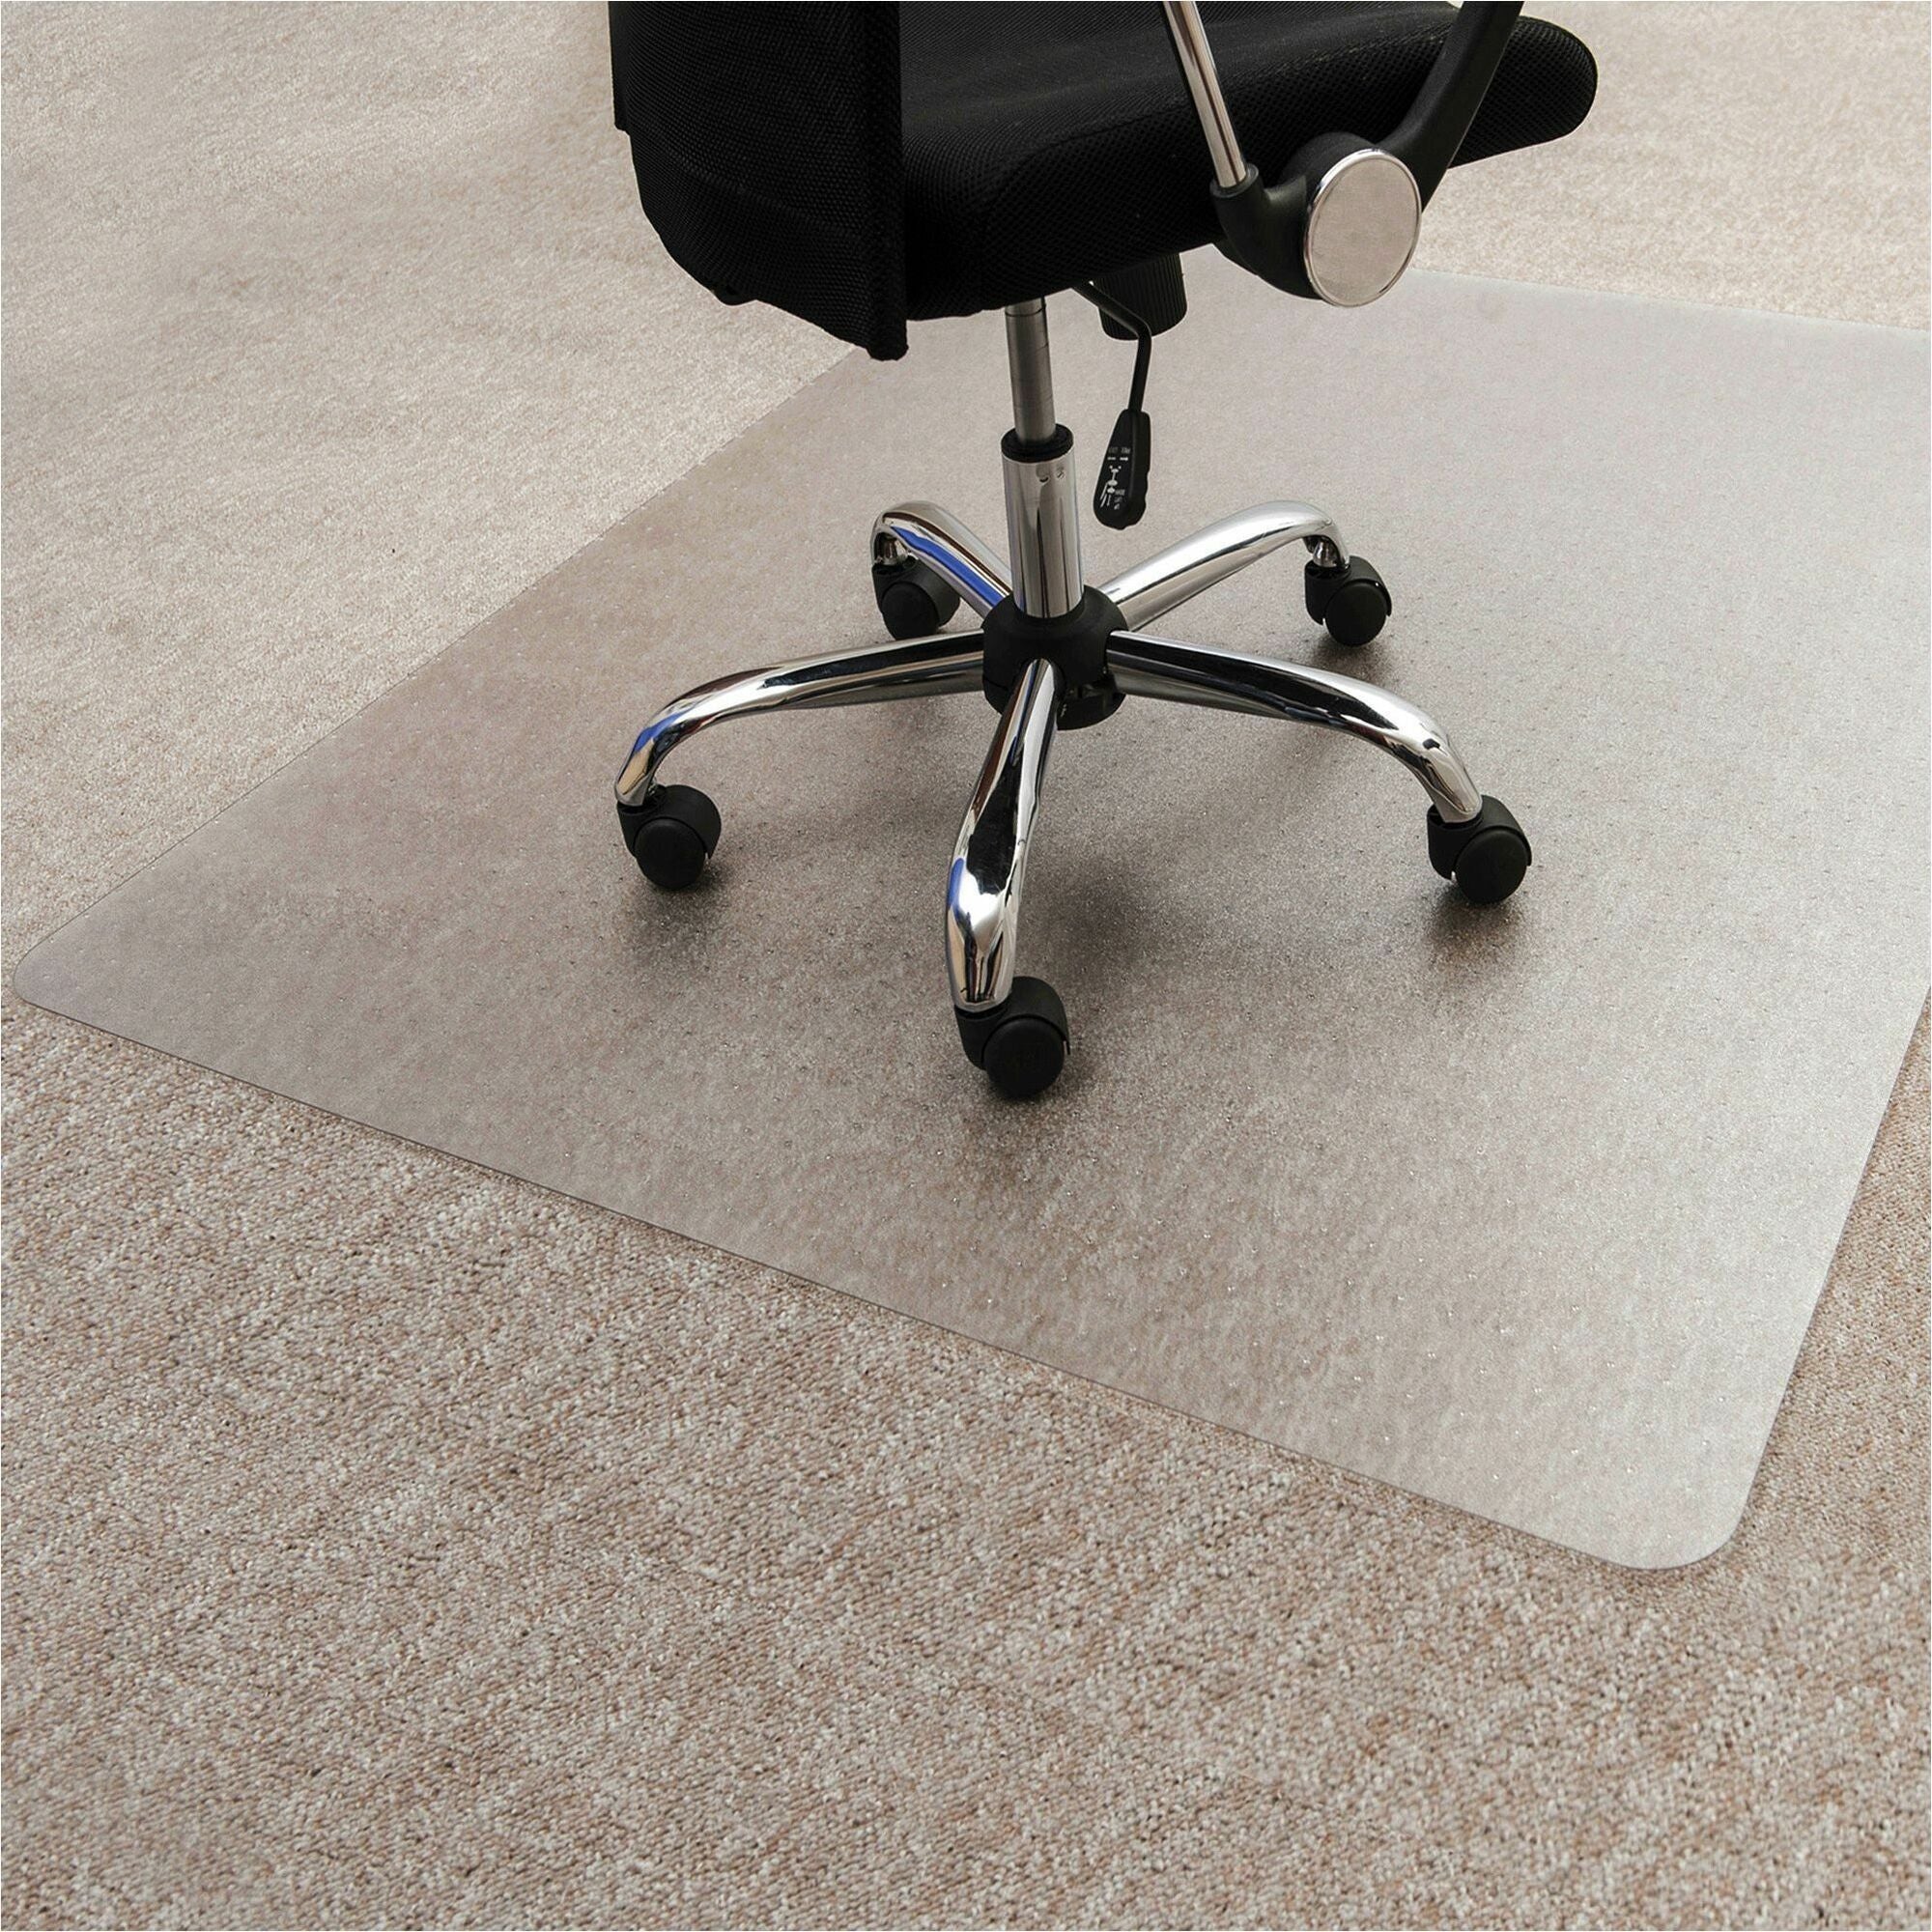 ecotex-enhanced-polymer-rectangular-chair-mat-for-carpets-up-to-3-8-30-x-48-home-office-carpet-48-length-x-30-width-x-0087-depth-x-0087-thickness-rectangular-polymer-clear-1each-taa-compliant_flreco113048ep - 1